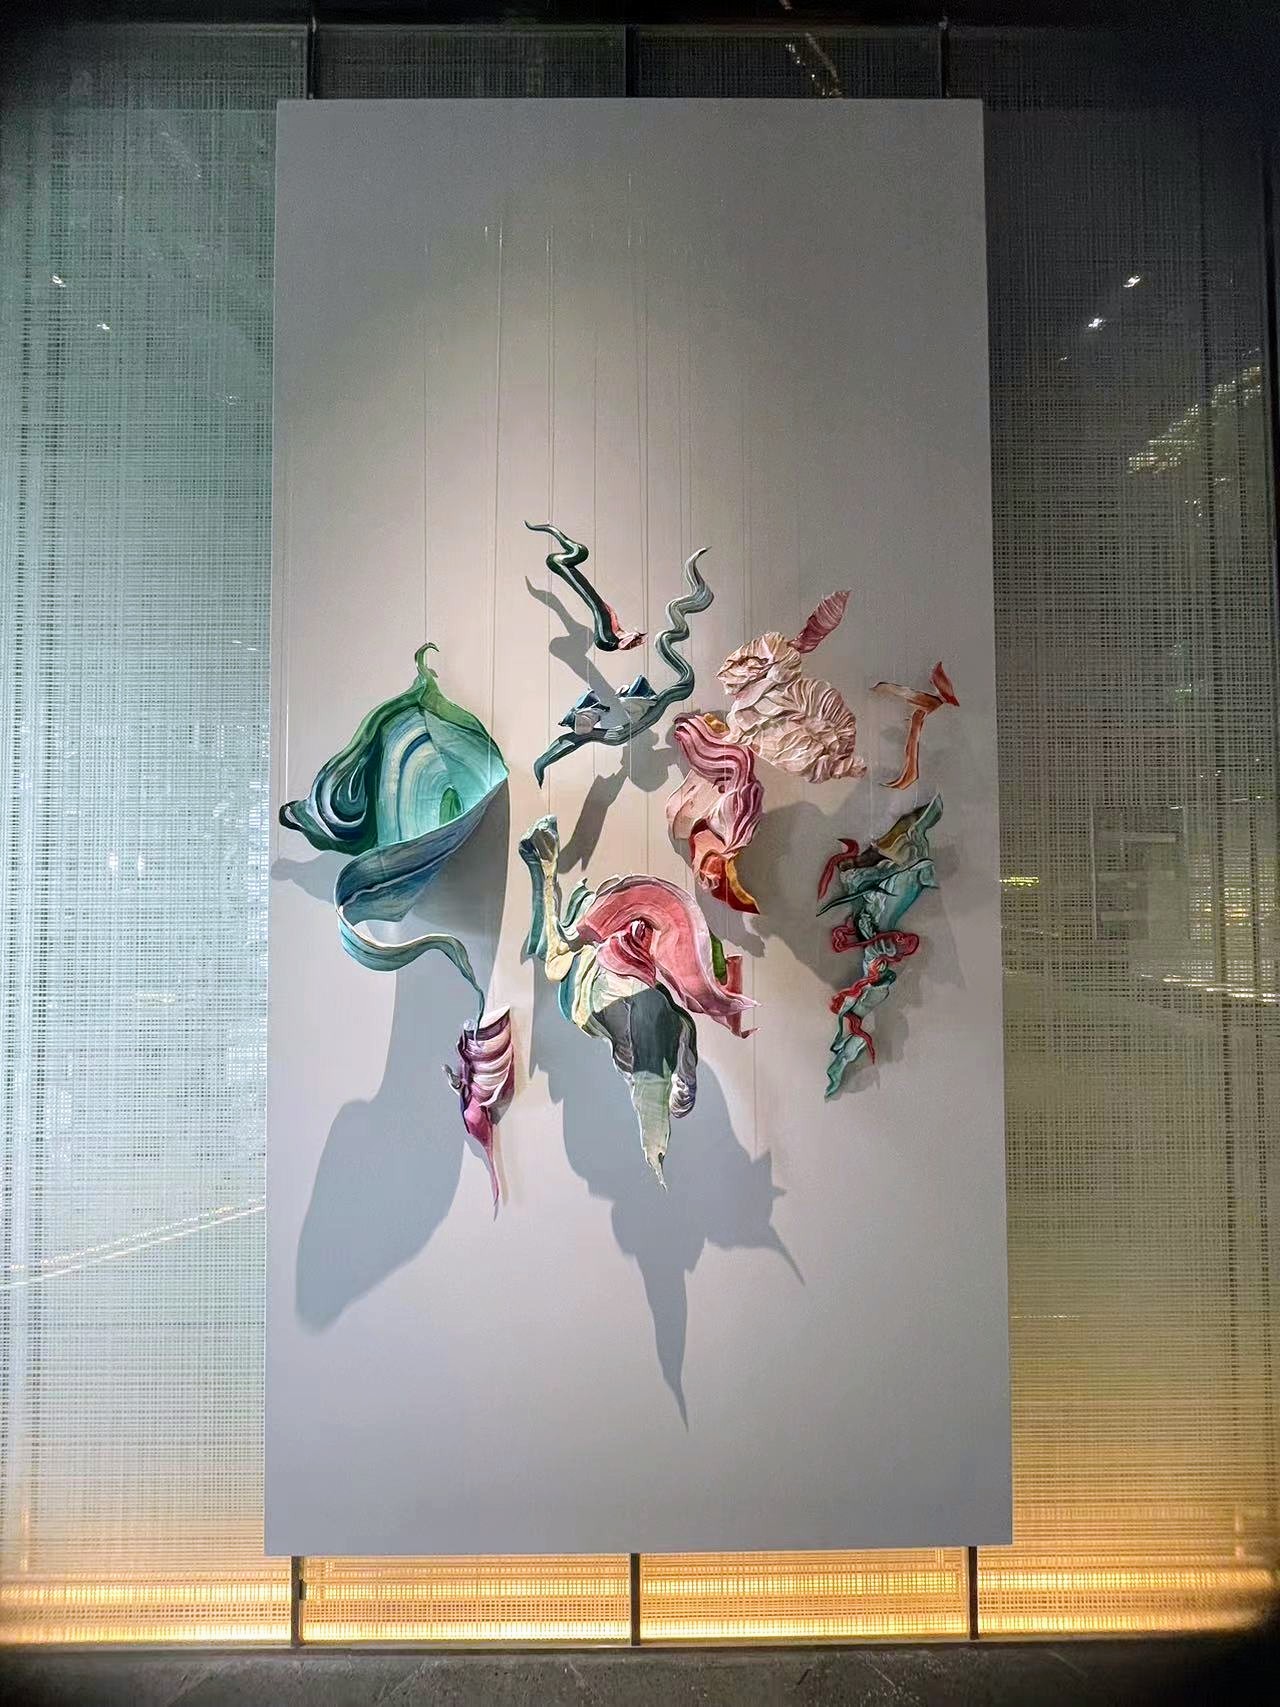 Ziling Wang's installation 'A World on Strings' used for Kohler's limited Artists Editions for their 150th year anniversary